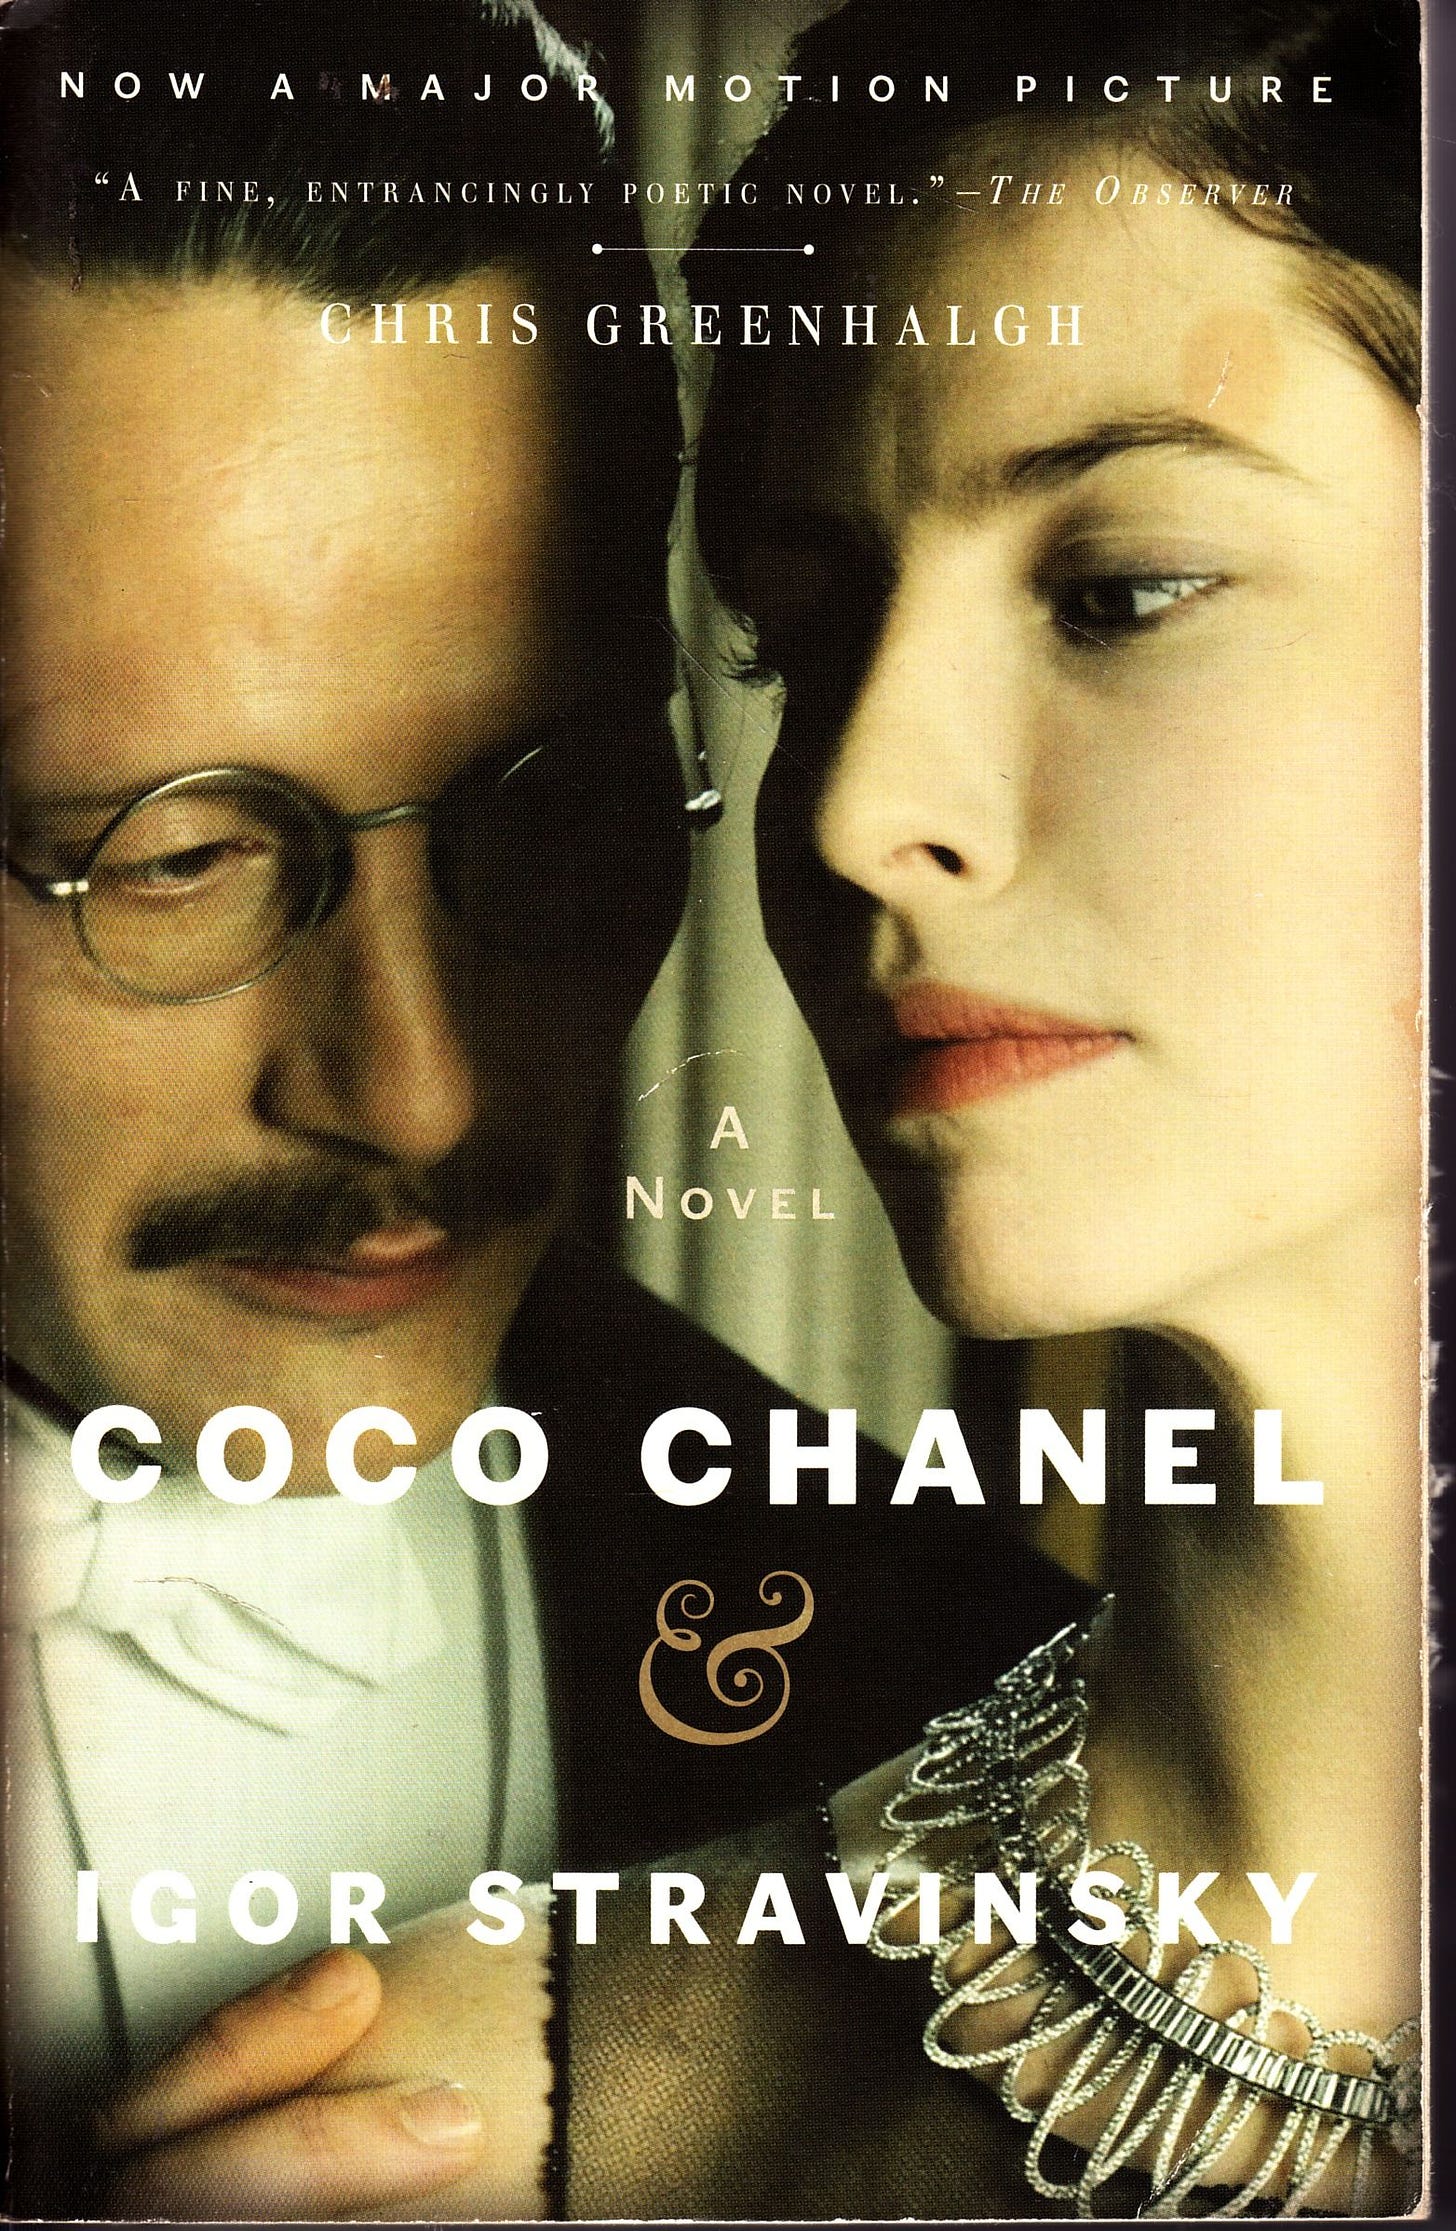 Coco Chanel & Igor Stravinsky by Chris Greenhalgh - Paperback - First  Edition - 2010 - from Ye Old Bookworm (SKU: W9428)